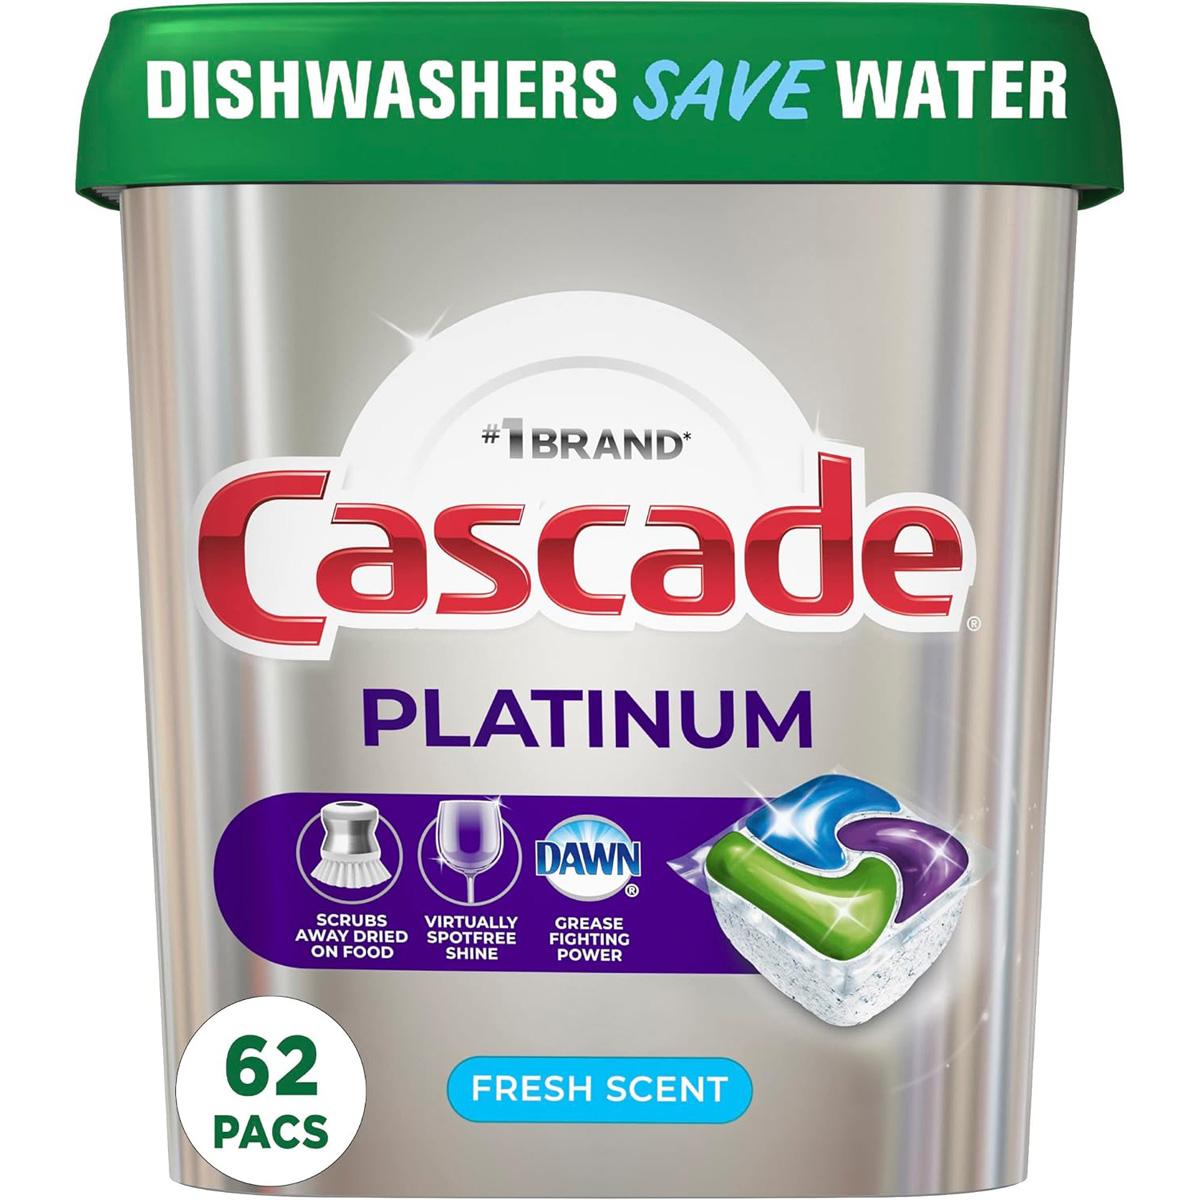 Cascade Platinum ActionPacs Dishwasher Detergent Pods 62 Pack for $10.26 Shipped